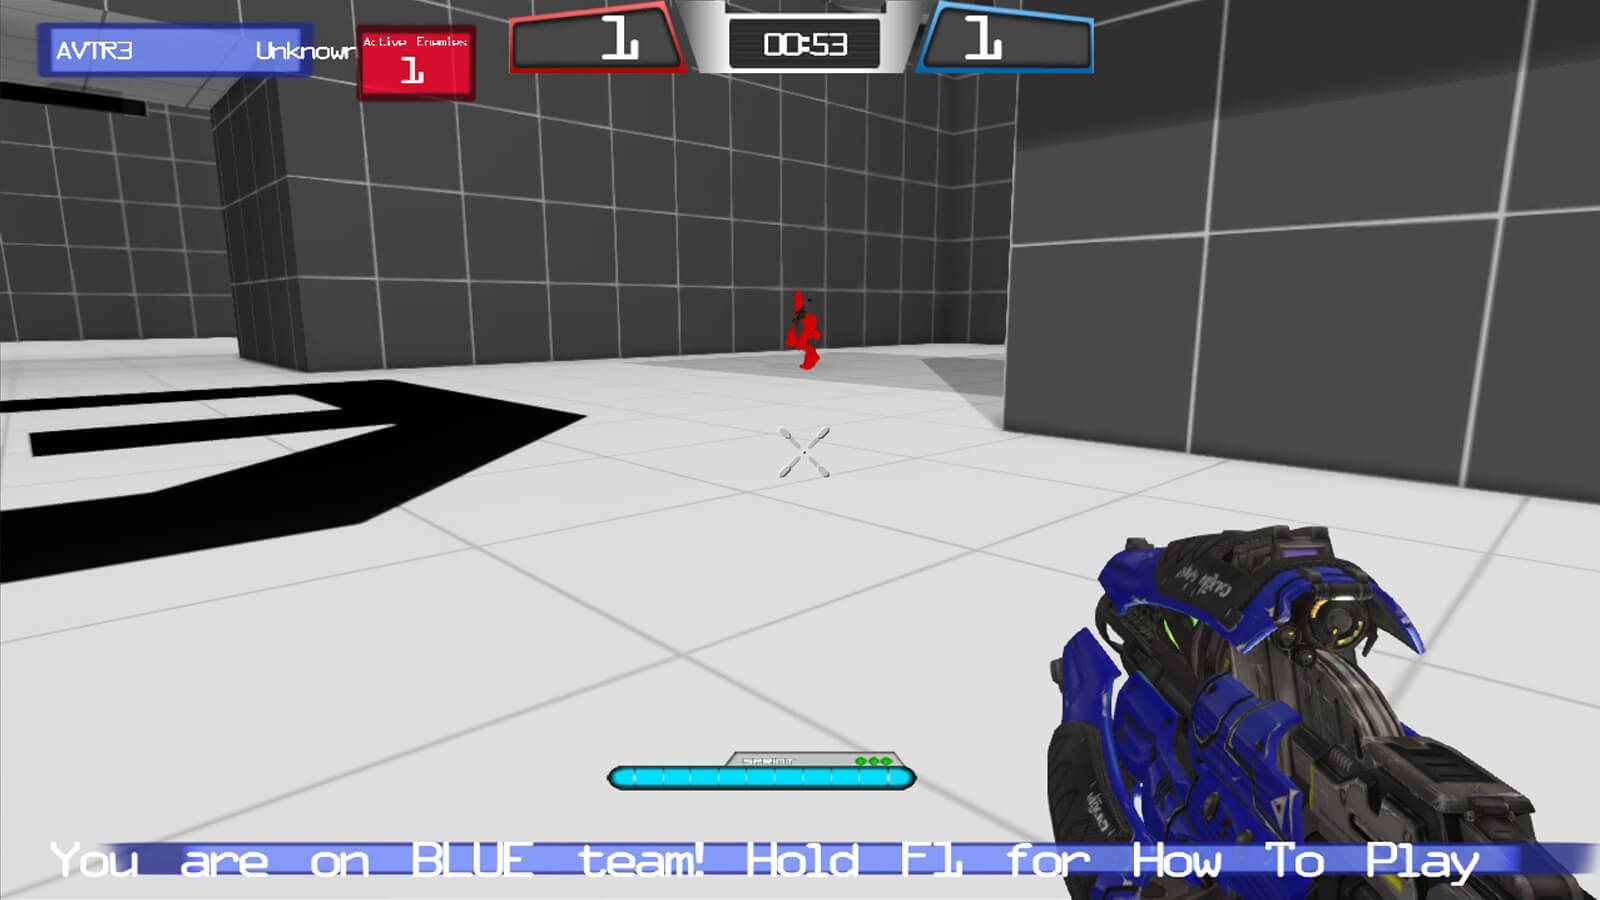 A blue gun points below a red avatar in a grey tiled room.